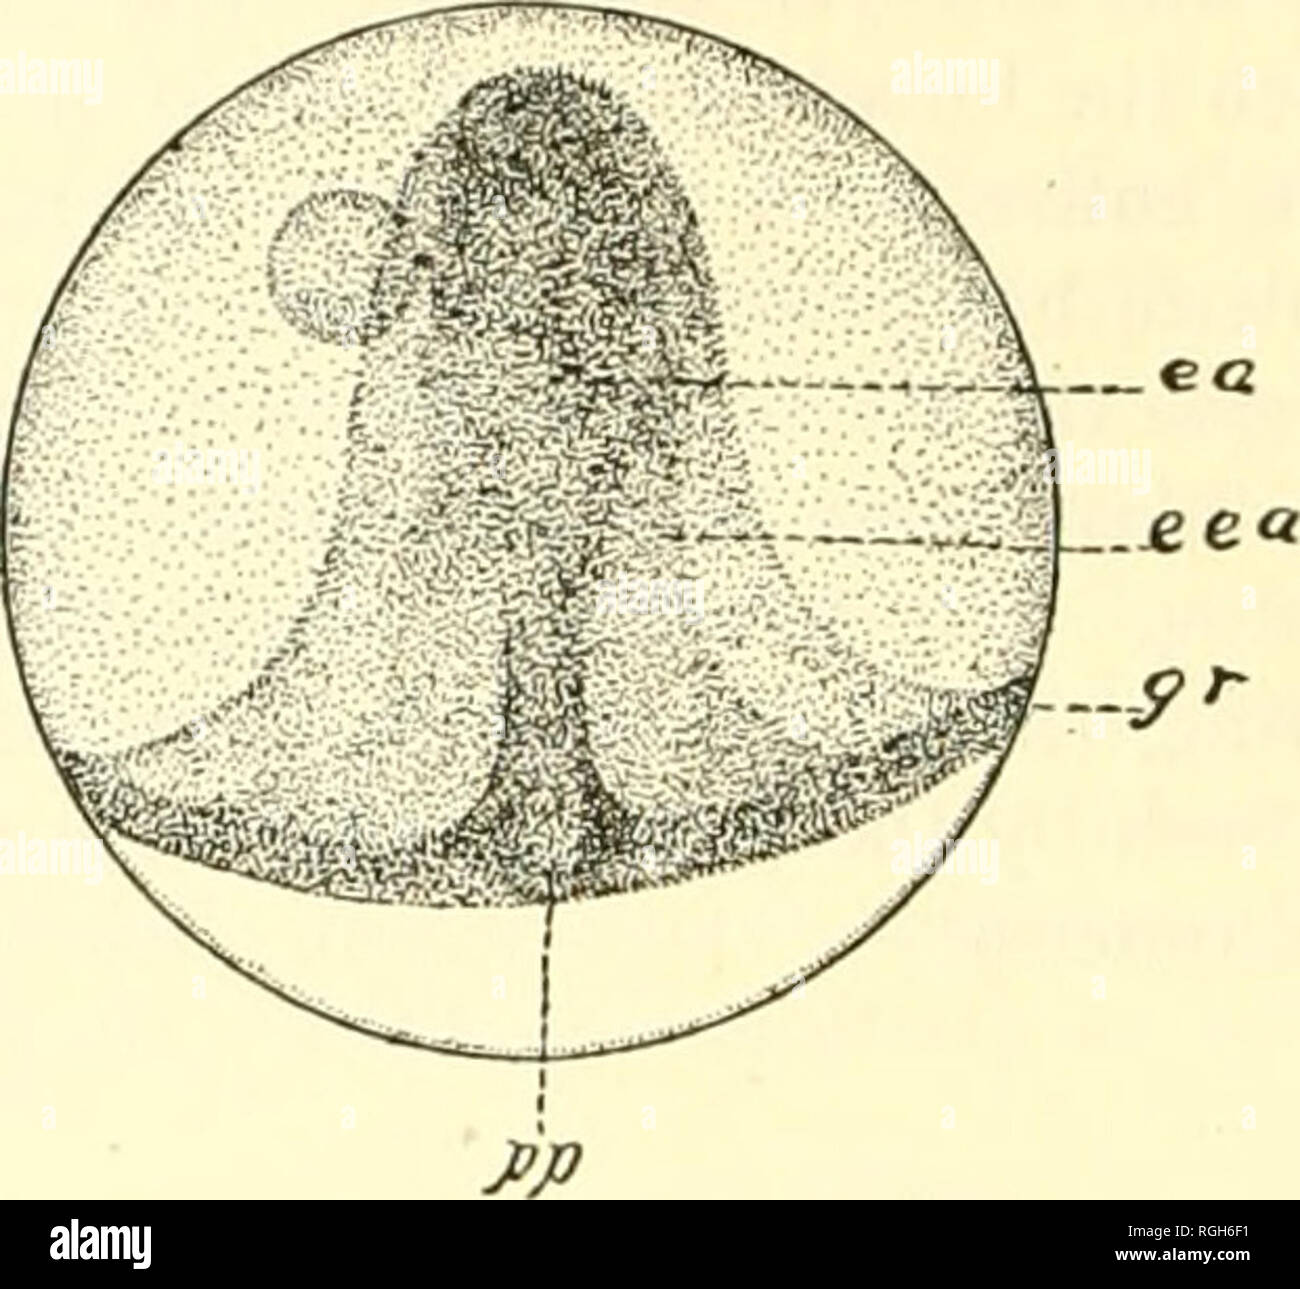 . Bulletin of the Bureau of Fisheries. Fisheries; Fish culture.  es. BAIRDIELLA CFIRYSURA. Fig. 9.—Egg showing later stage in differentia- tion of embryonic shield; qt, germ ring; es, embryonic shield. Fig. 10.—Egg showing embryonic shield (fs) with embryonic area i,ea) outlined; eea, extra-embry- onic area; gr, germ ring; i&gt;p, posterior pole of blastoderm. outlined it is somewhat broader in the anterior or head region than in the posterior region. Observed in surface view (fig. 10) the embryonic area now has a more or less regular spatulate form. While the embryonic shield is growing forwa Stock Photo